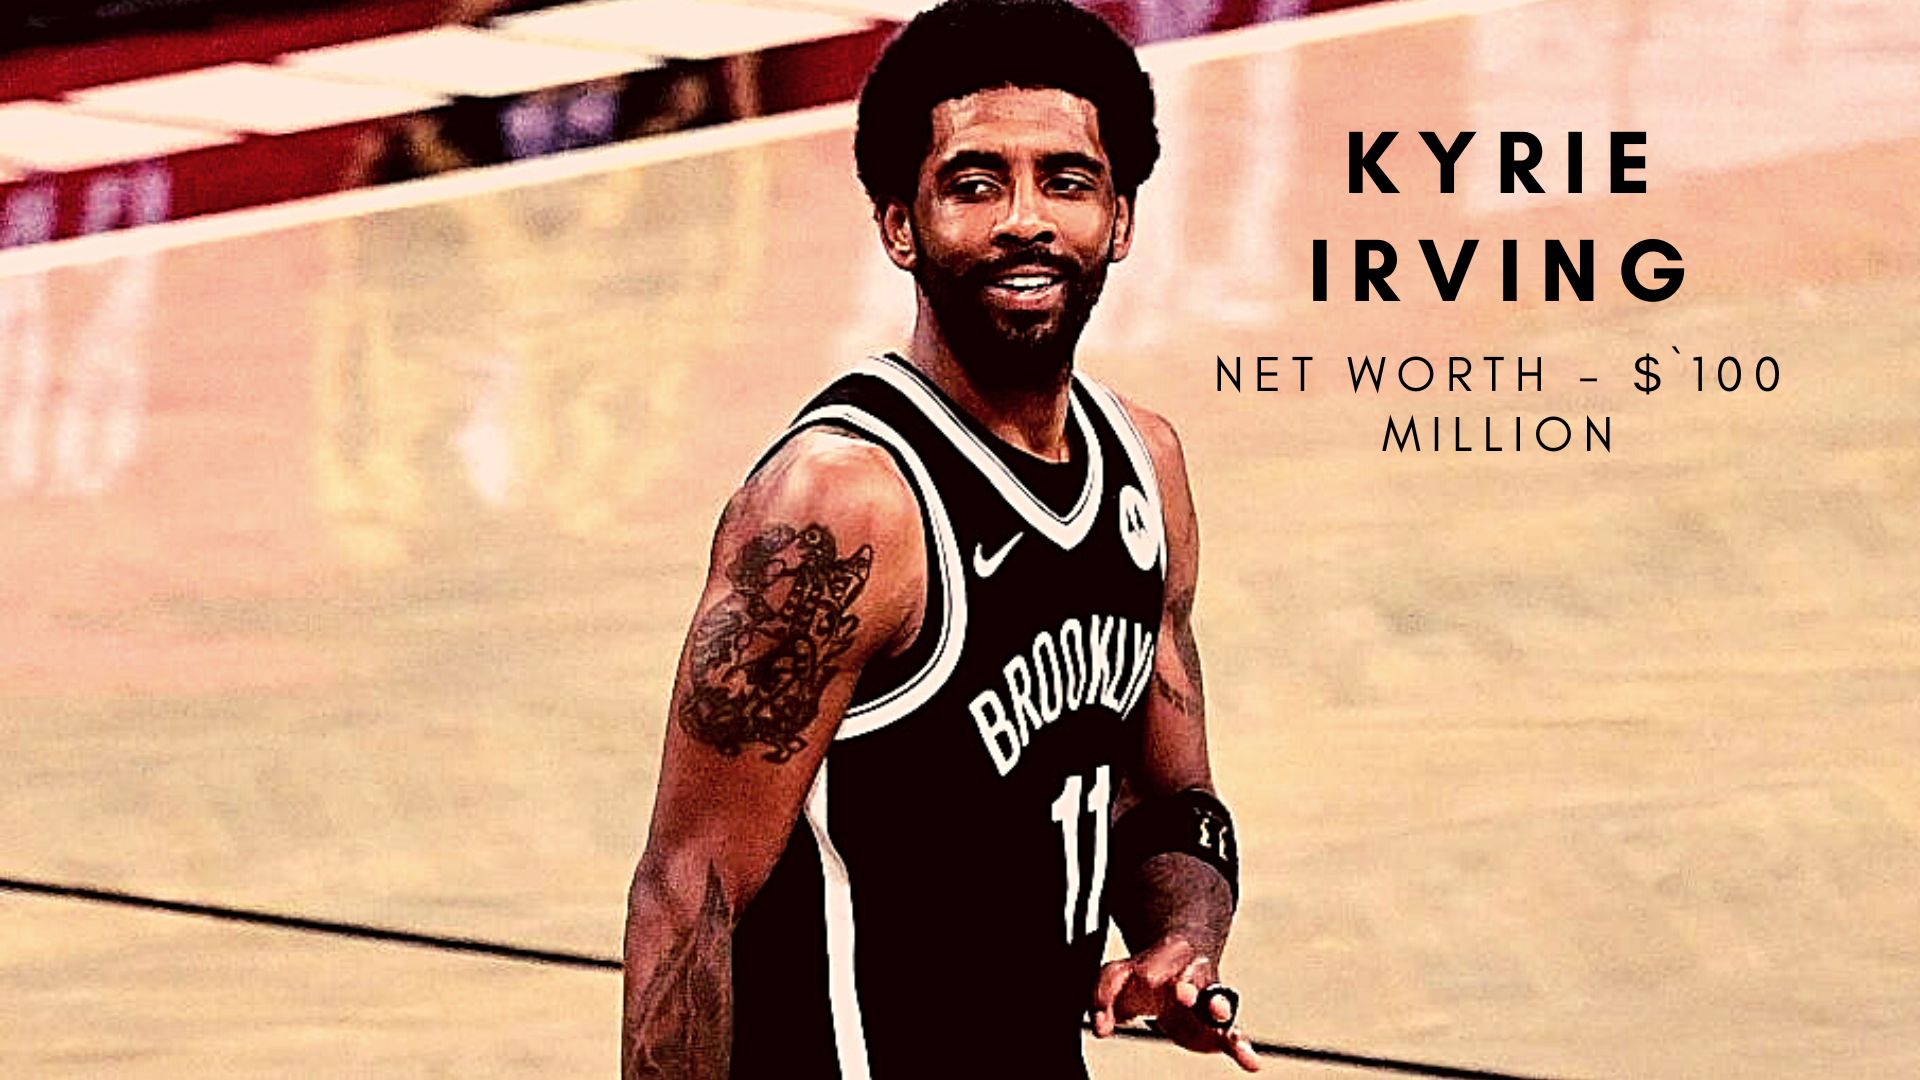 KYRIE IRVING Net Worth